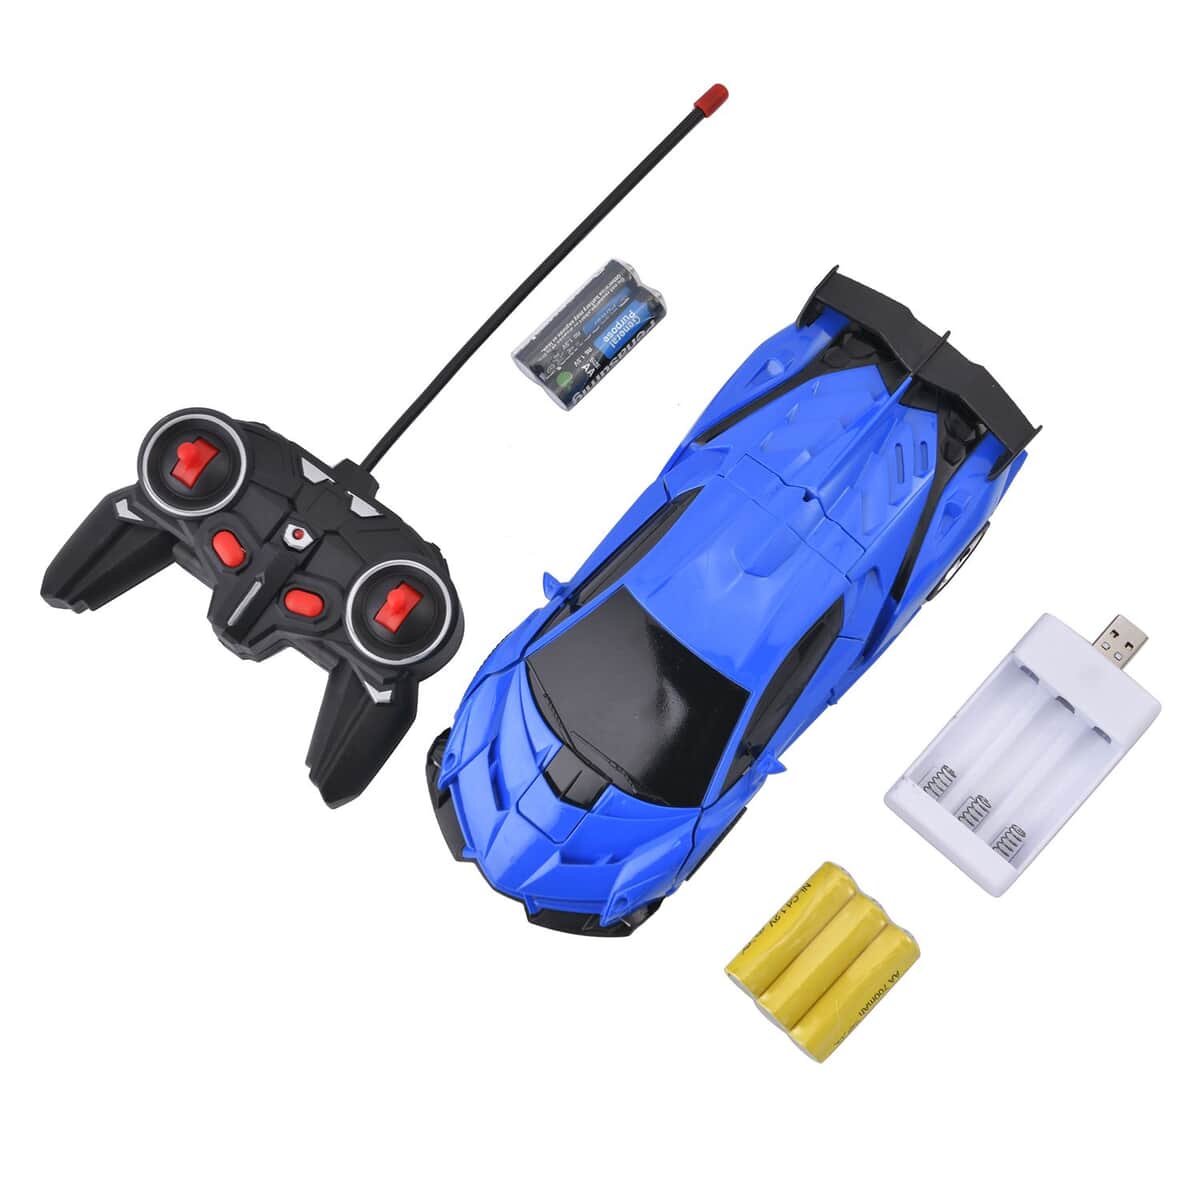 2 in 1 Blue Electric Toy Transform Robot and RC Car 360 Degree Turning Flexibly (Size - Car 23x9x6 cm and Robot: 20x17x15 cm) image number 0